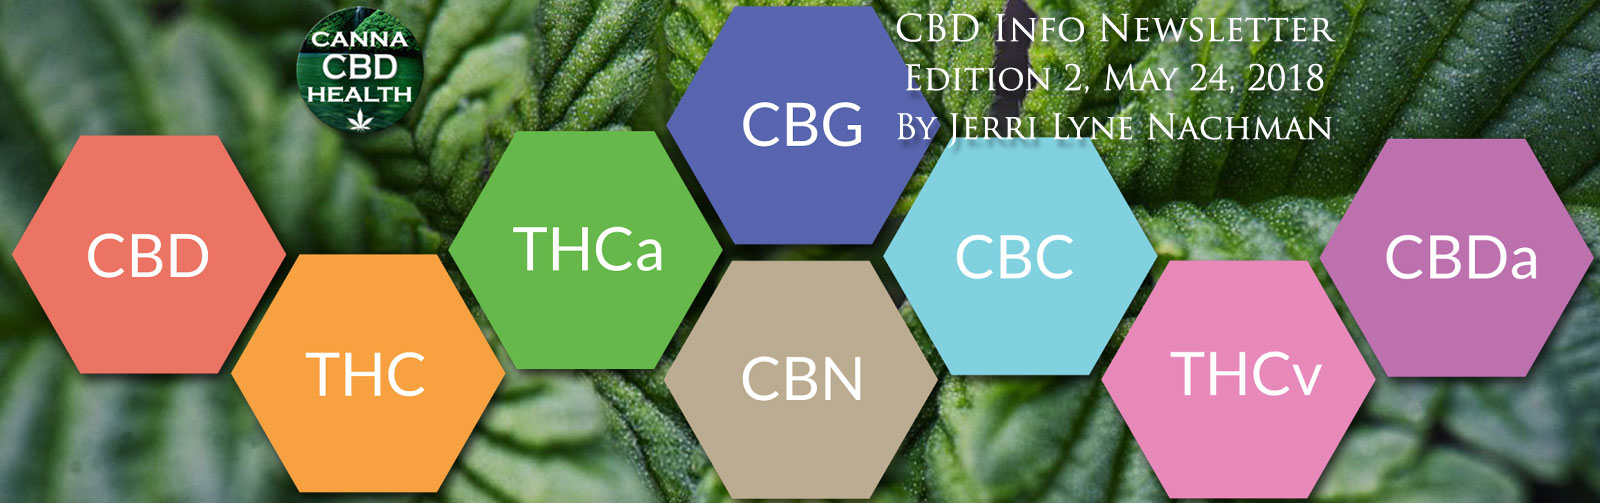 At least 113 distinct cannabinoids have been isolated from cannabis.